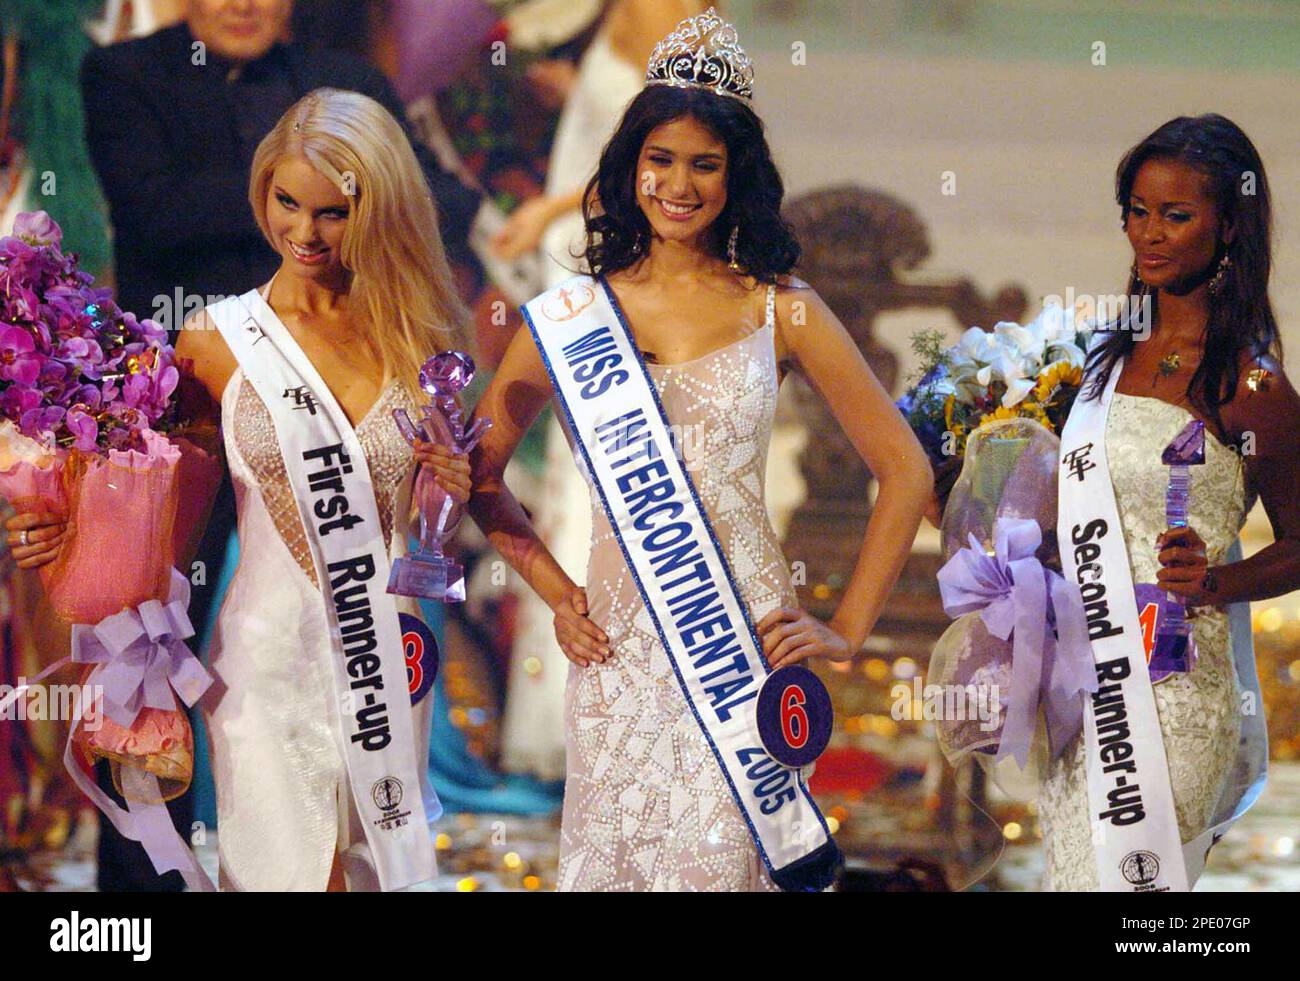 The 34th Miss Intercontinental Emmarys Pinto, center, from Venezuela, the first runner-up Sarianna Kankaristo, left, from Finland, and the second runner-up Shauntavia Loo, right, from Norway greet the audience in Huangshan, east China's Anhui province, on Saturday July 30, 2005. Sixty-one contestants from 60 countries around the world attended the 34th Miss Intercontinental Final. (AP Photo/Xinhua, Wang Lei) Stock Photo